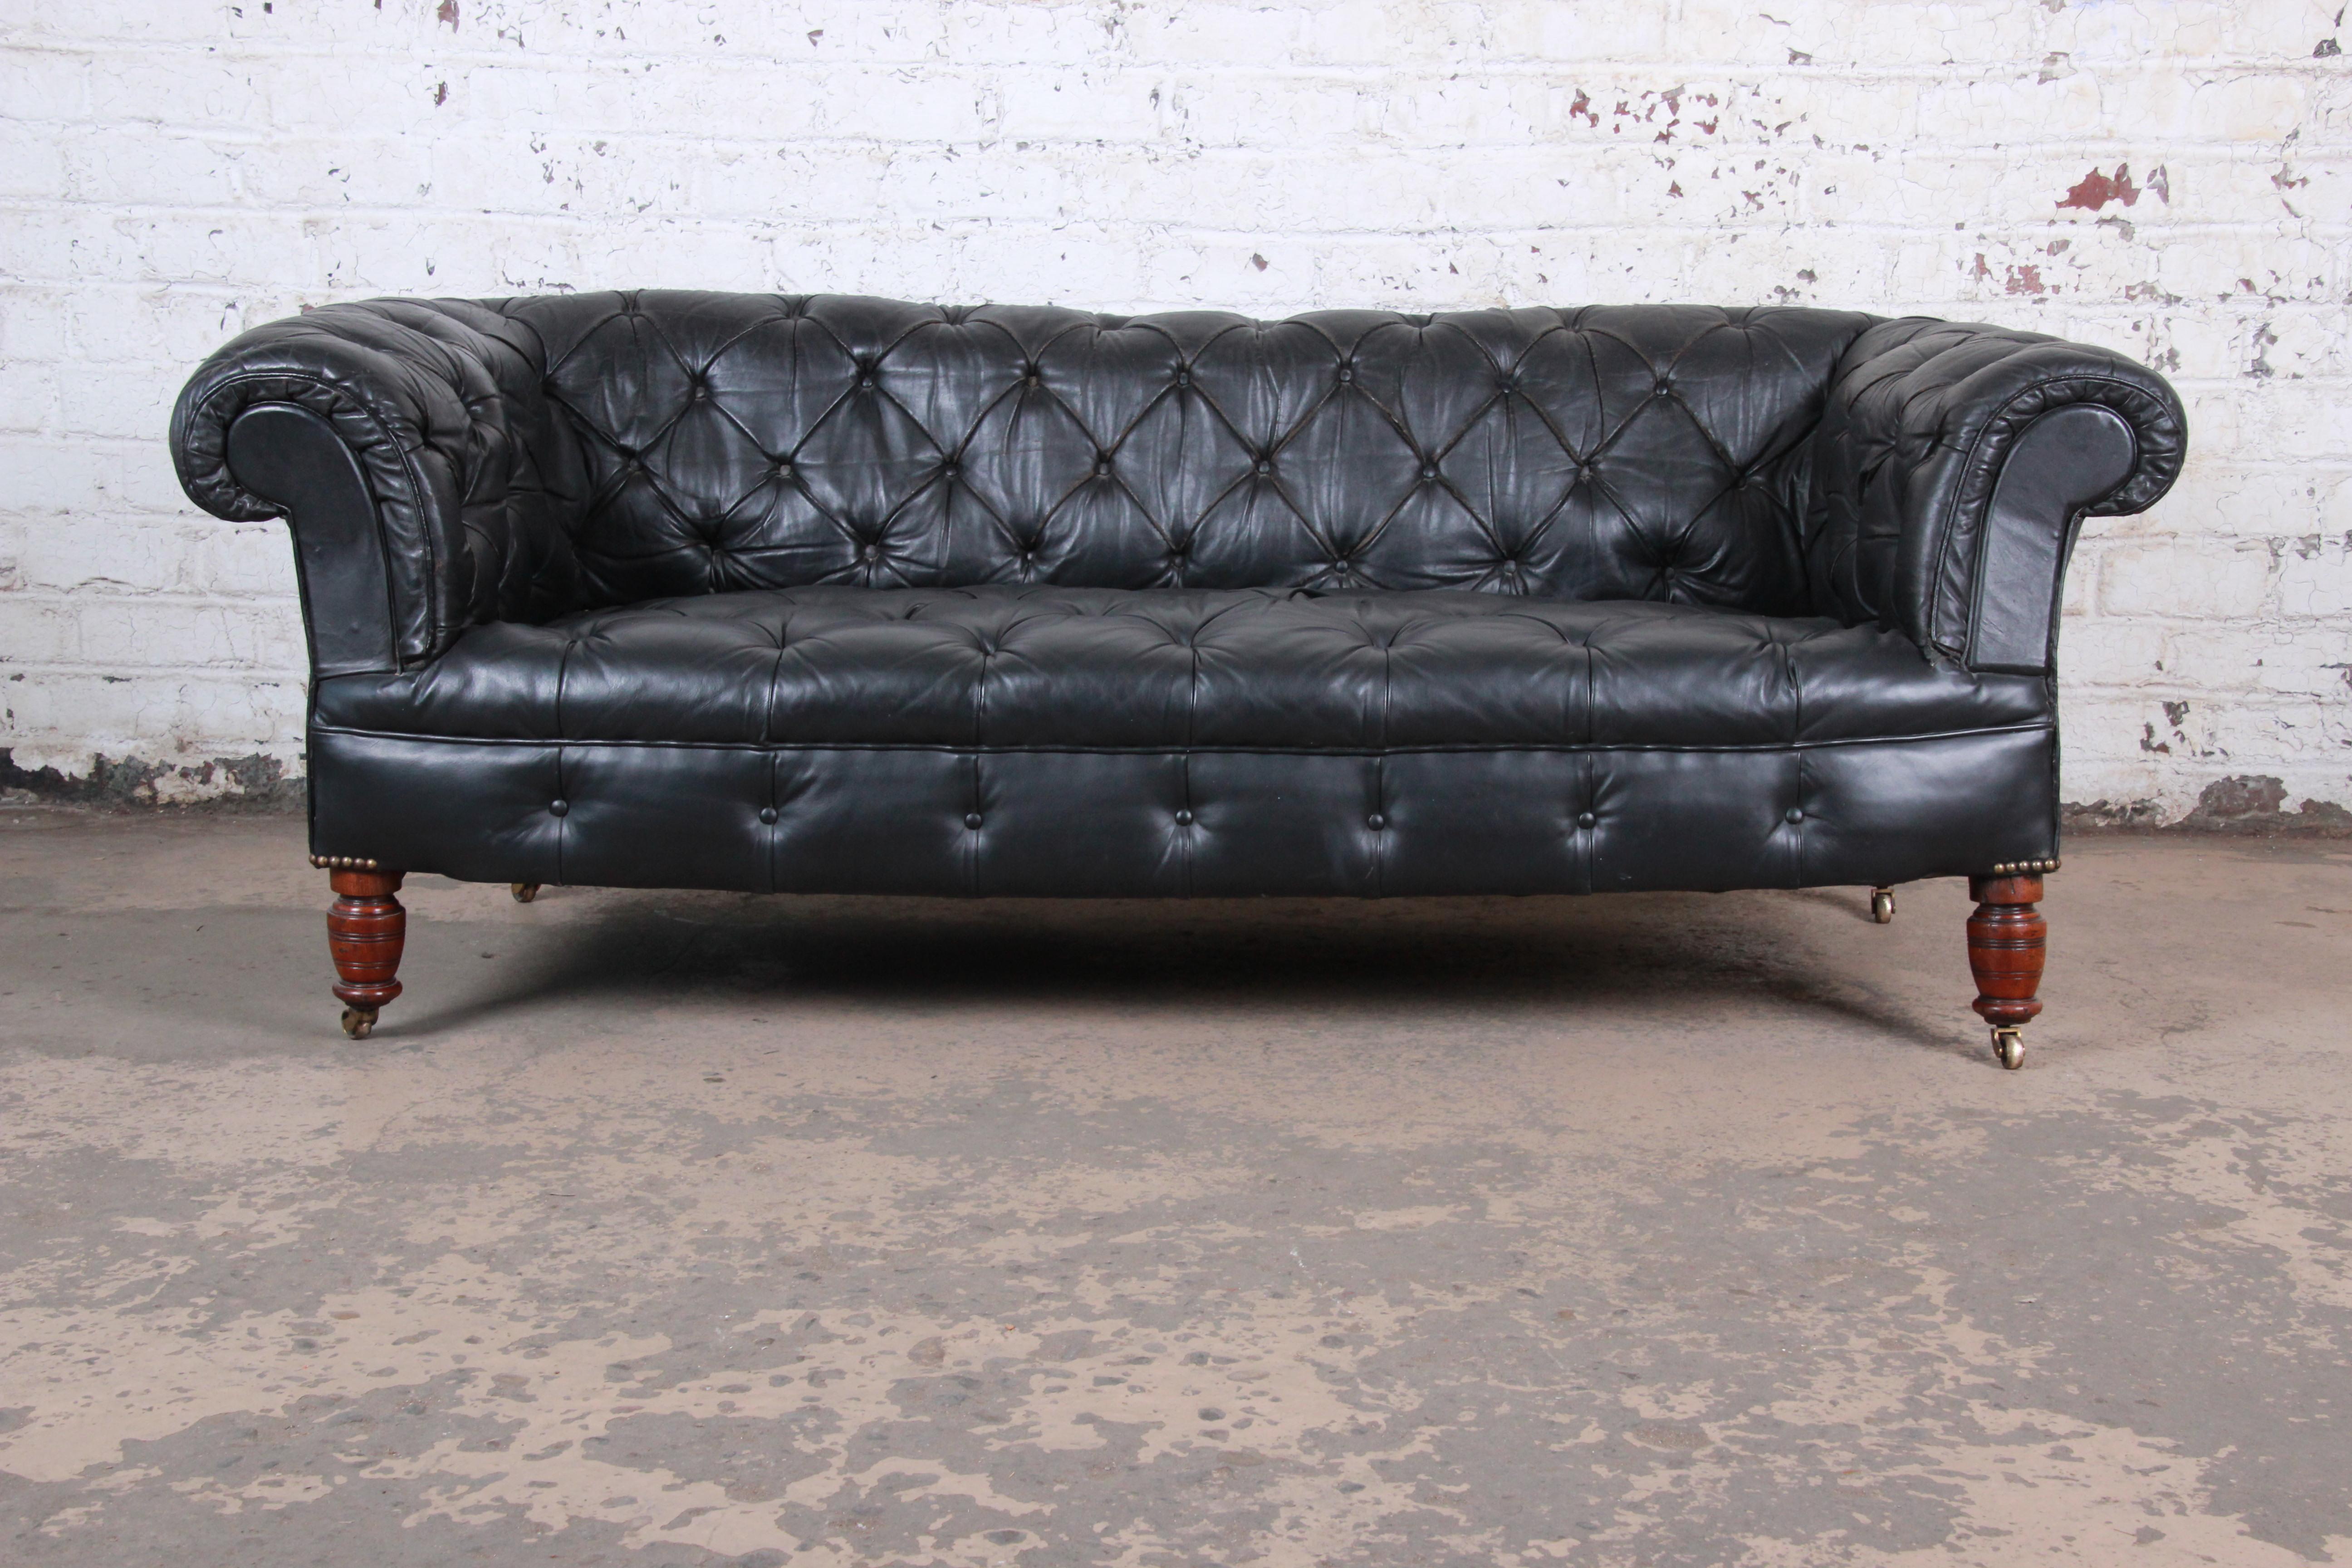 A vintage tufted black leather Chesterfield sofa,

circa 1960s

Leather + turned walnut legs + brass casters

Measures: 76.5